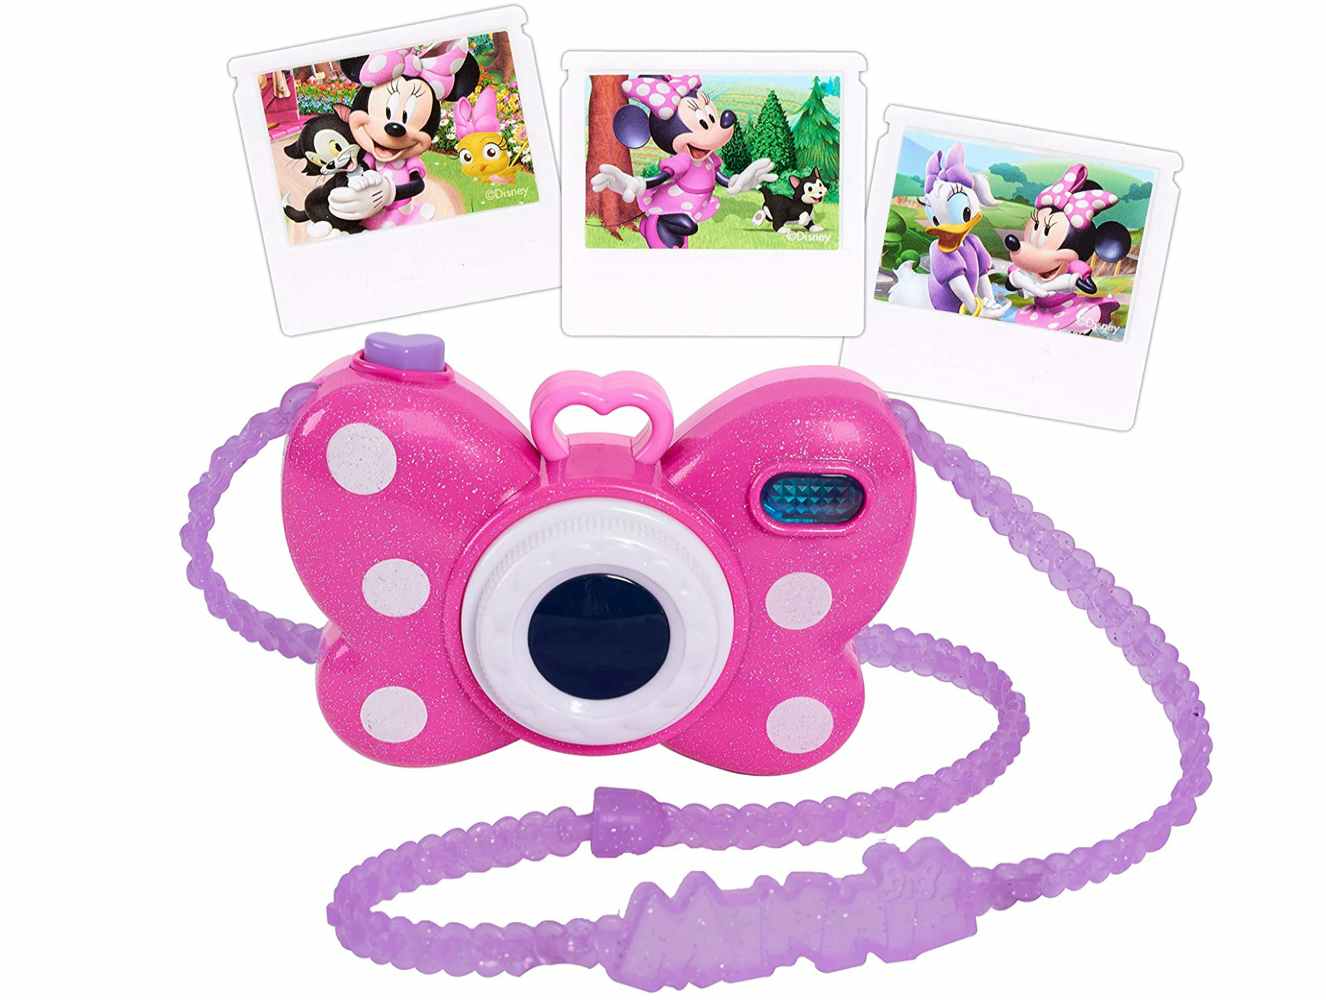 Pink bow camera and Minnie Mouse photos on a white background